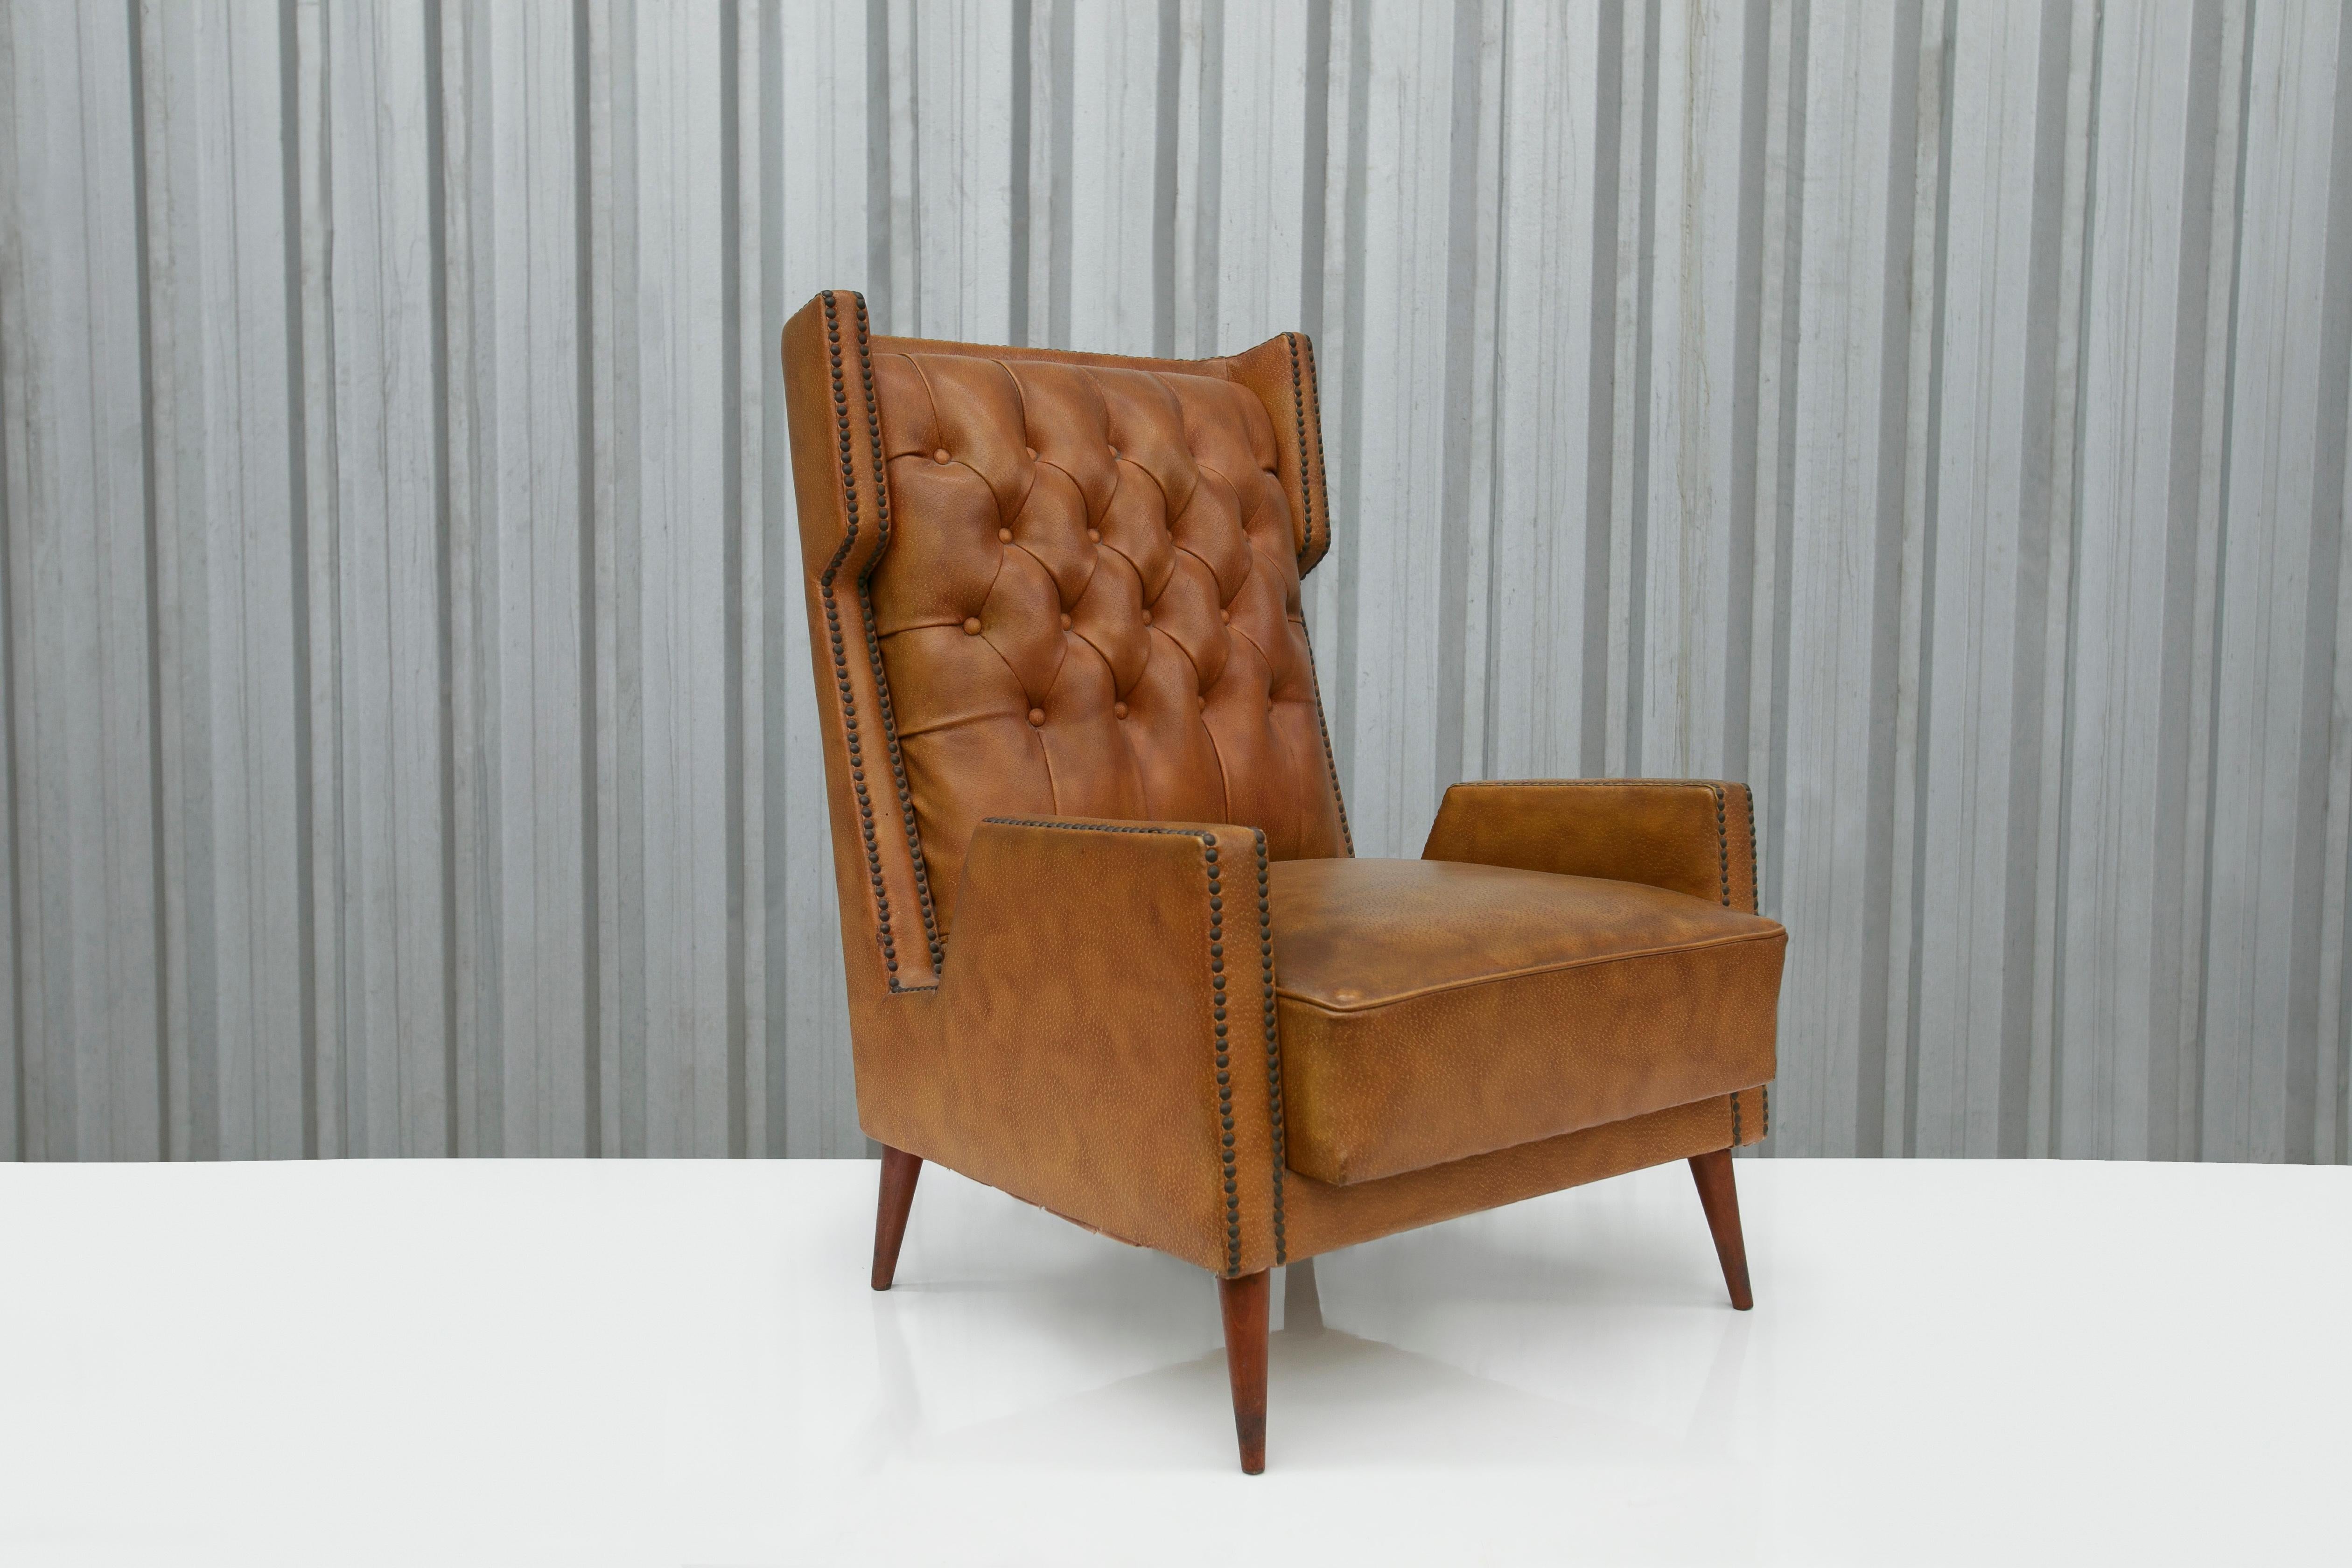 Mid-Century Modern Brazilian Modern Armchair in Hardwood, Brown Leatherette, G. Scapinelli, 1950s For Sale